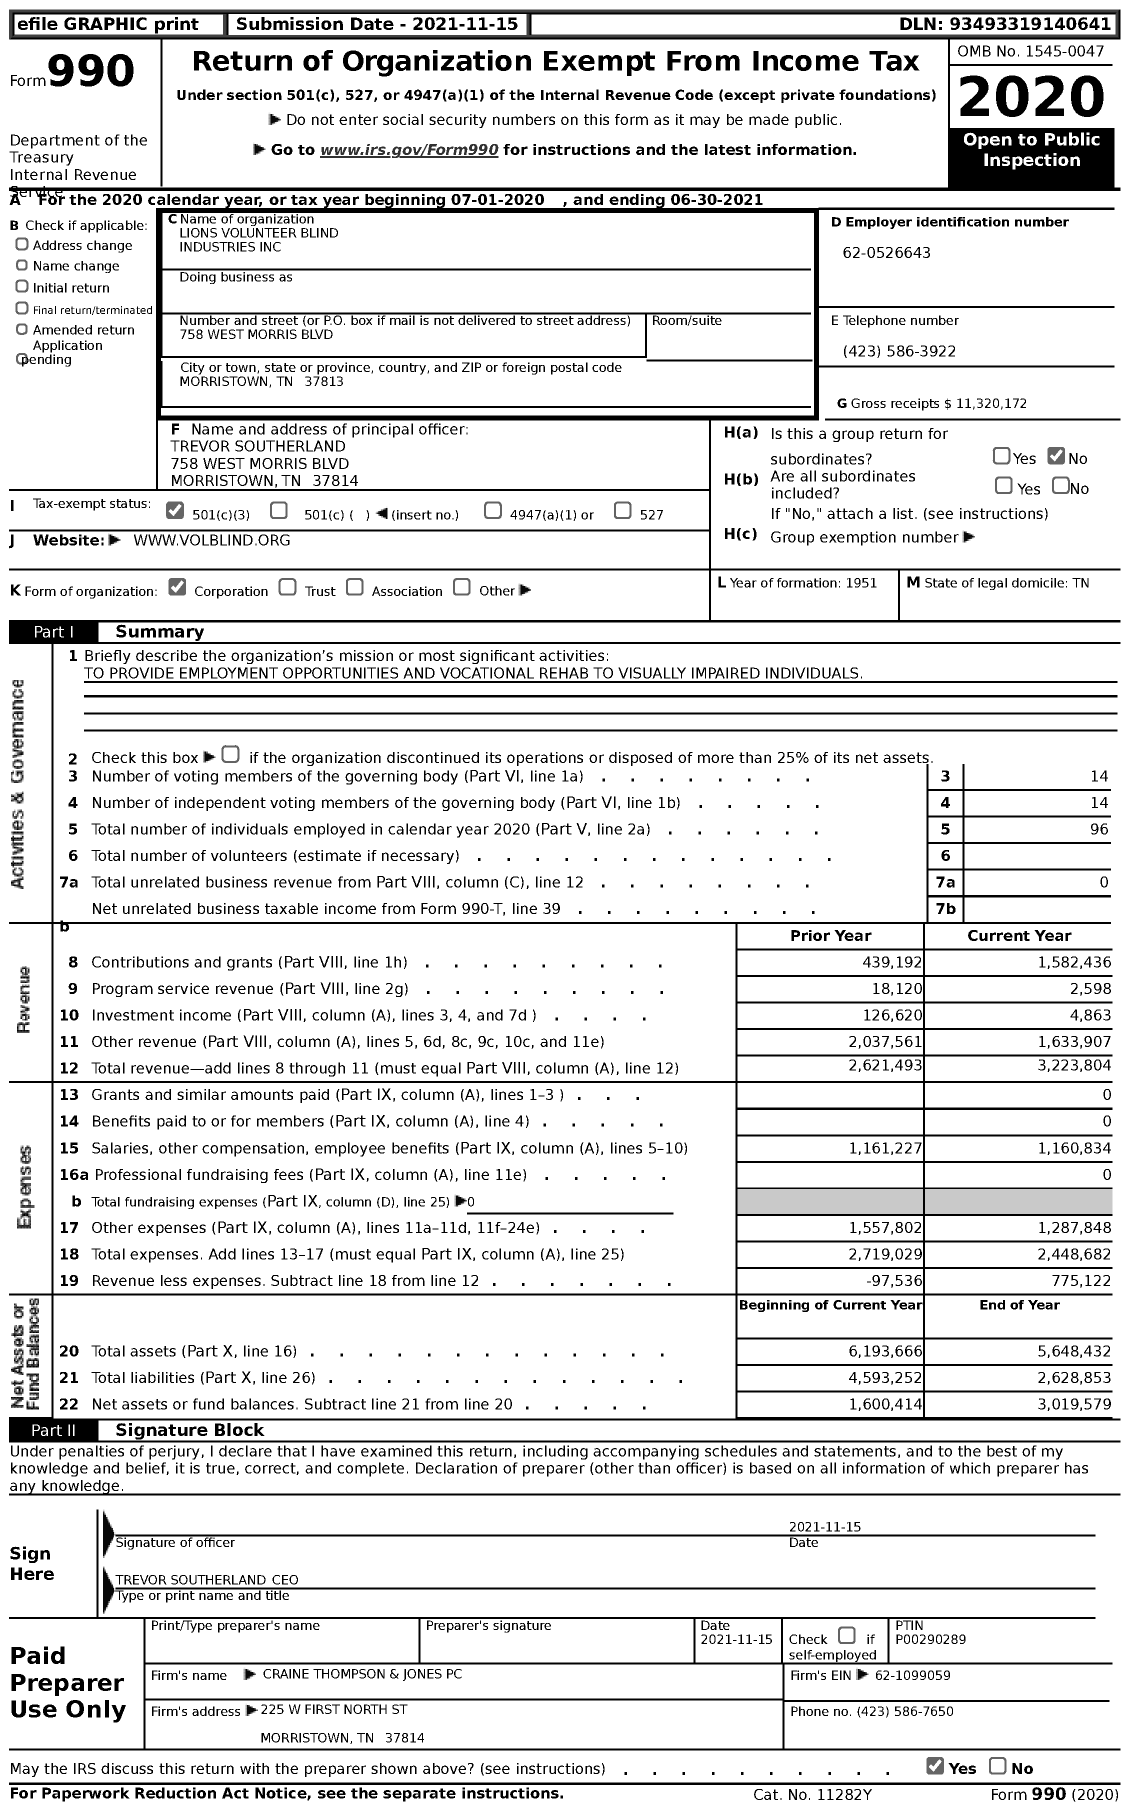 Image of first page of 2020 Form 990 for Lions Volunteer Blind Industries